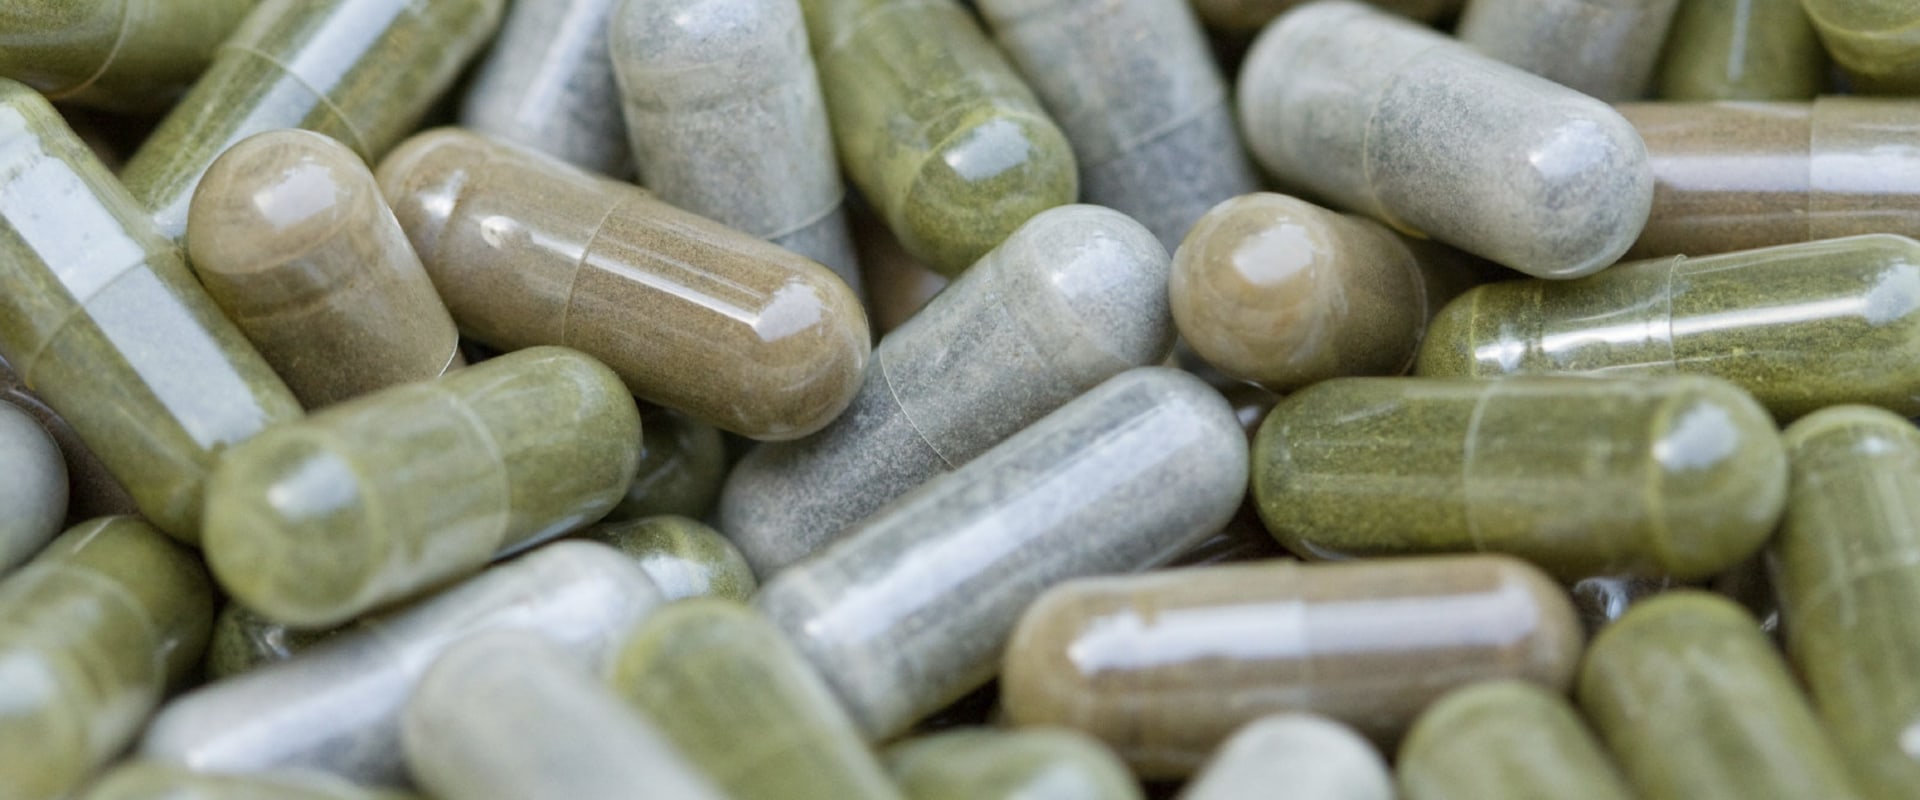 The Benefits and Side Effects of Taking Vitamins and Supplements: An Expert's Guide